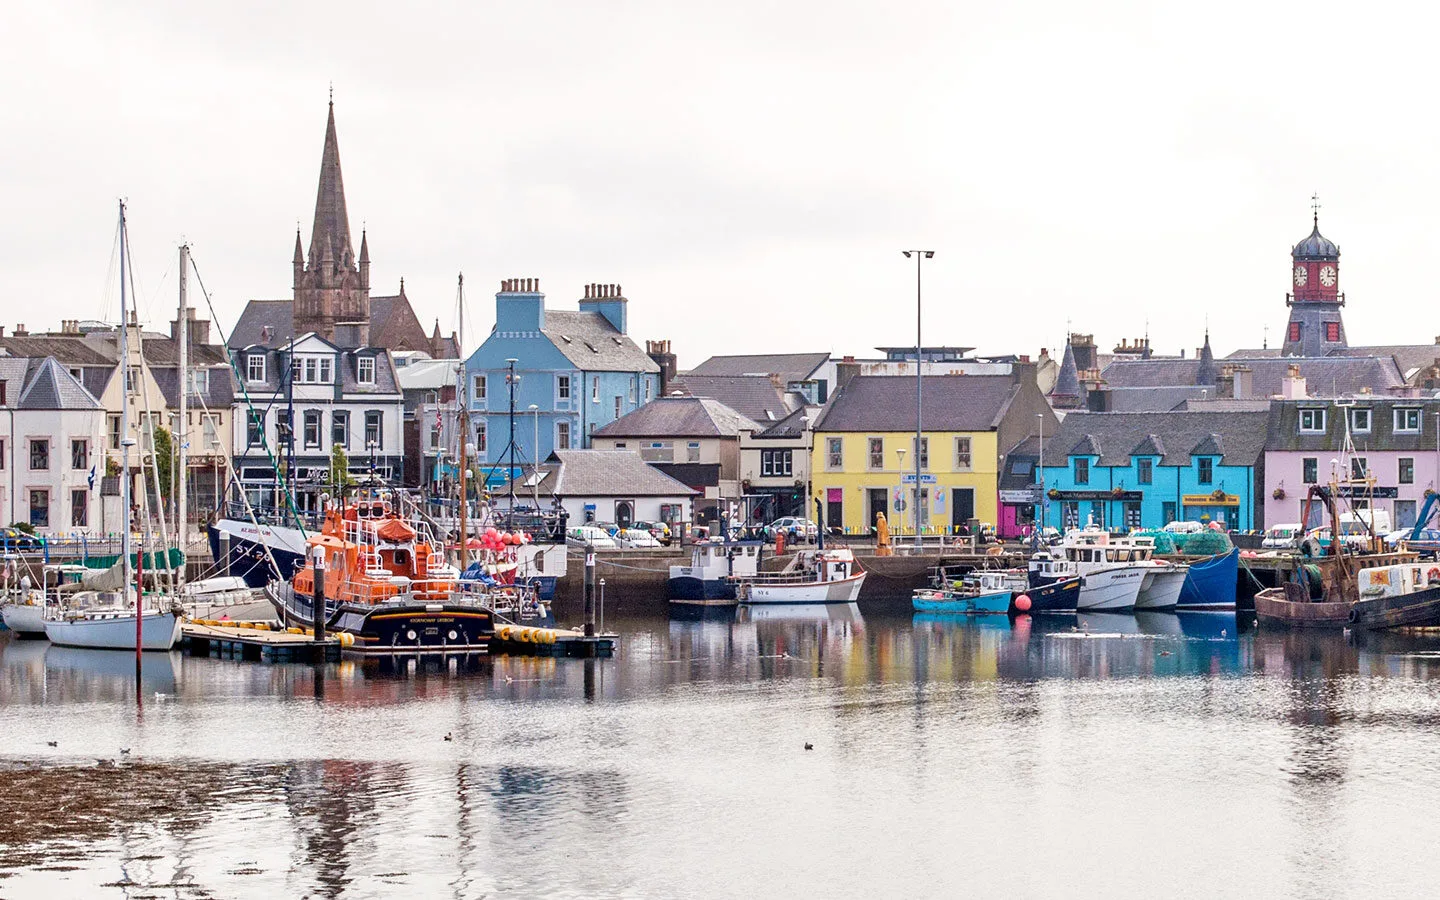 Boats in Stornoway harbour on the Isle of Lewis